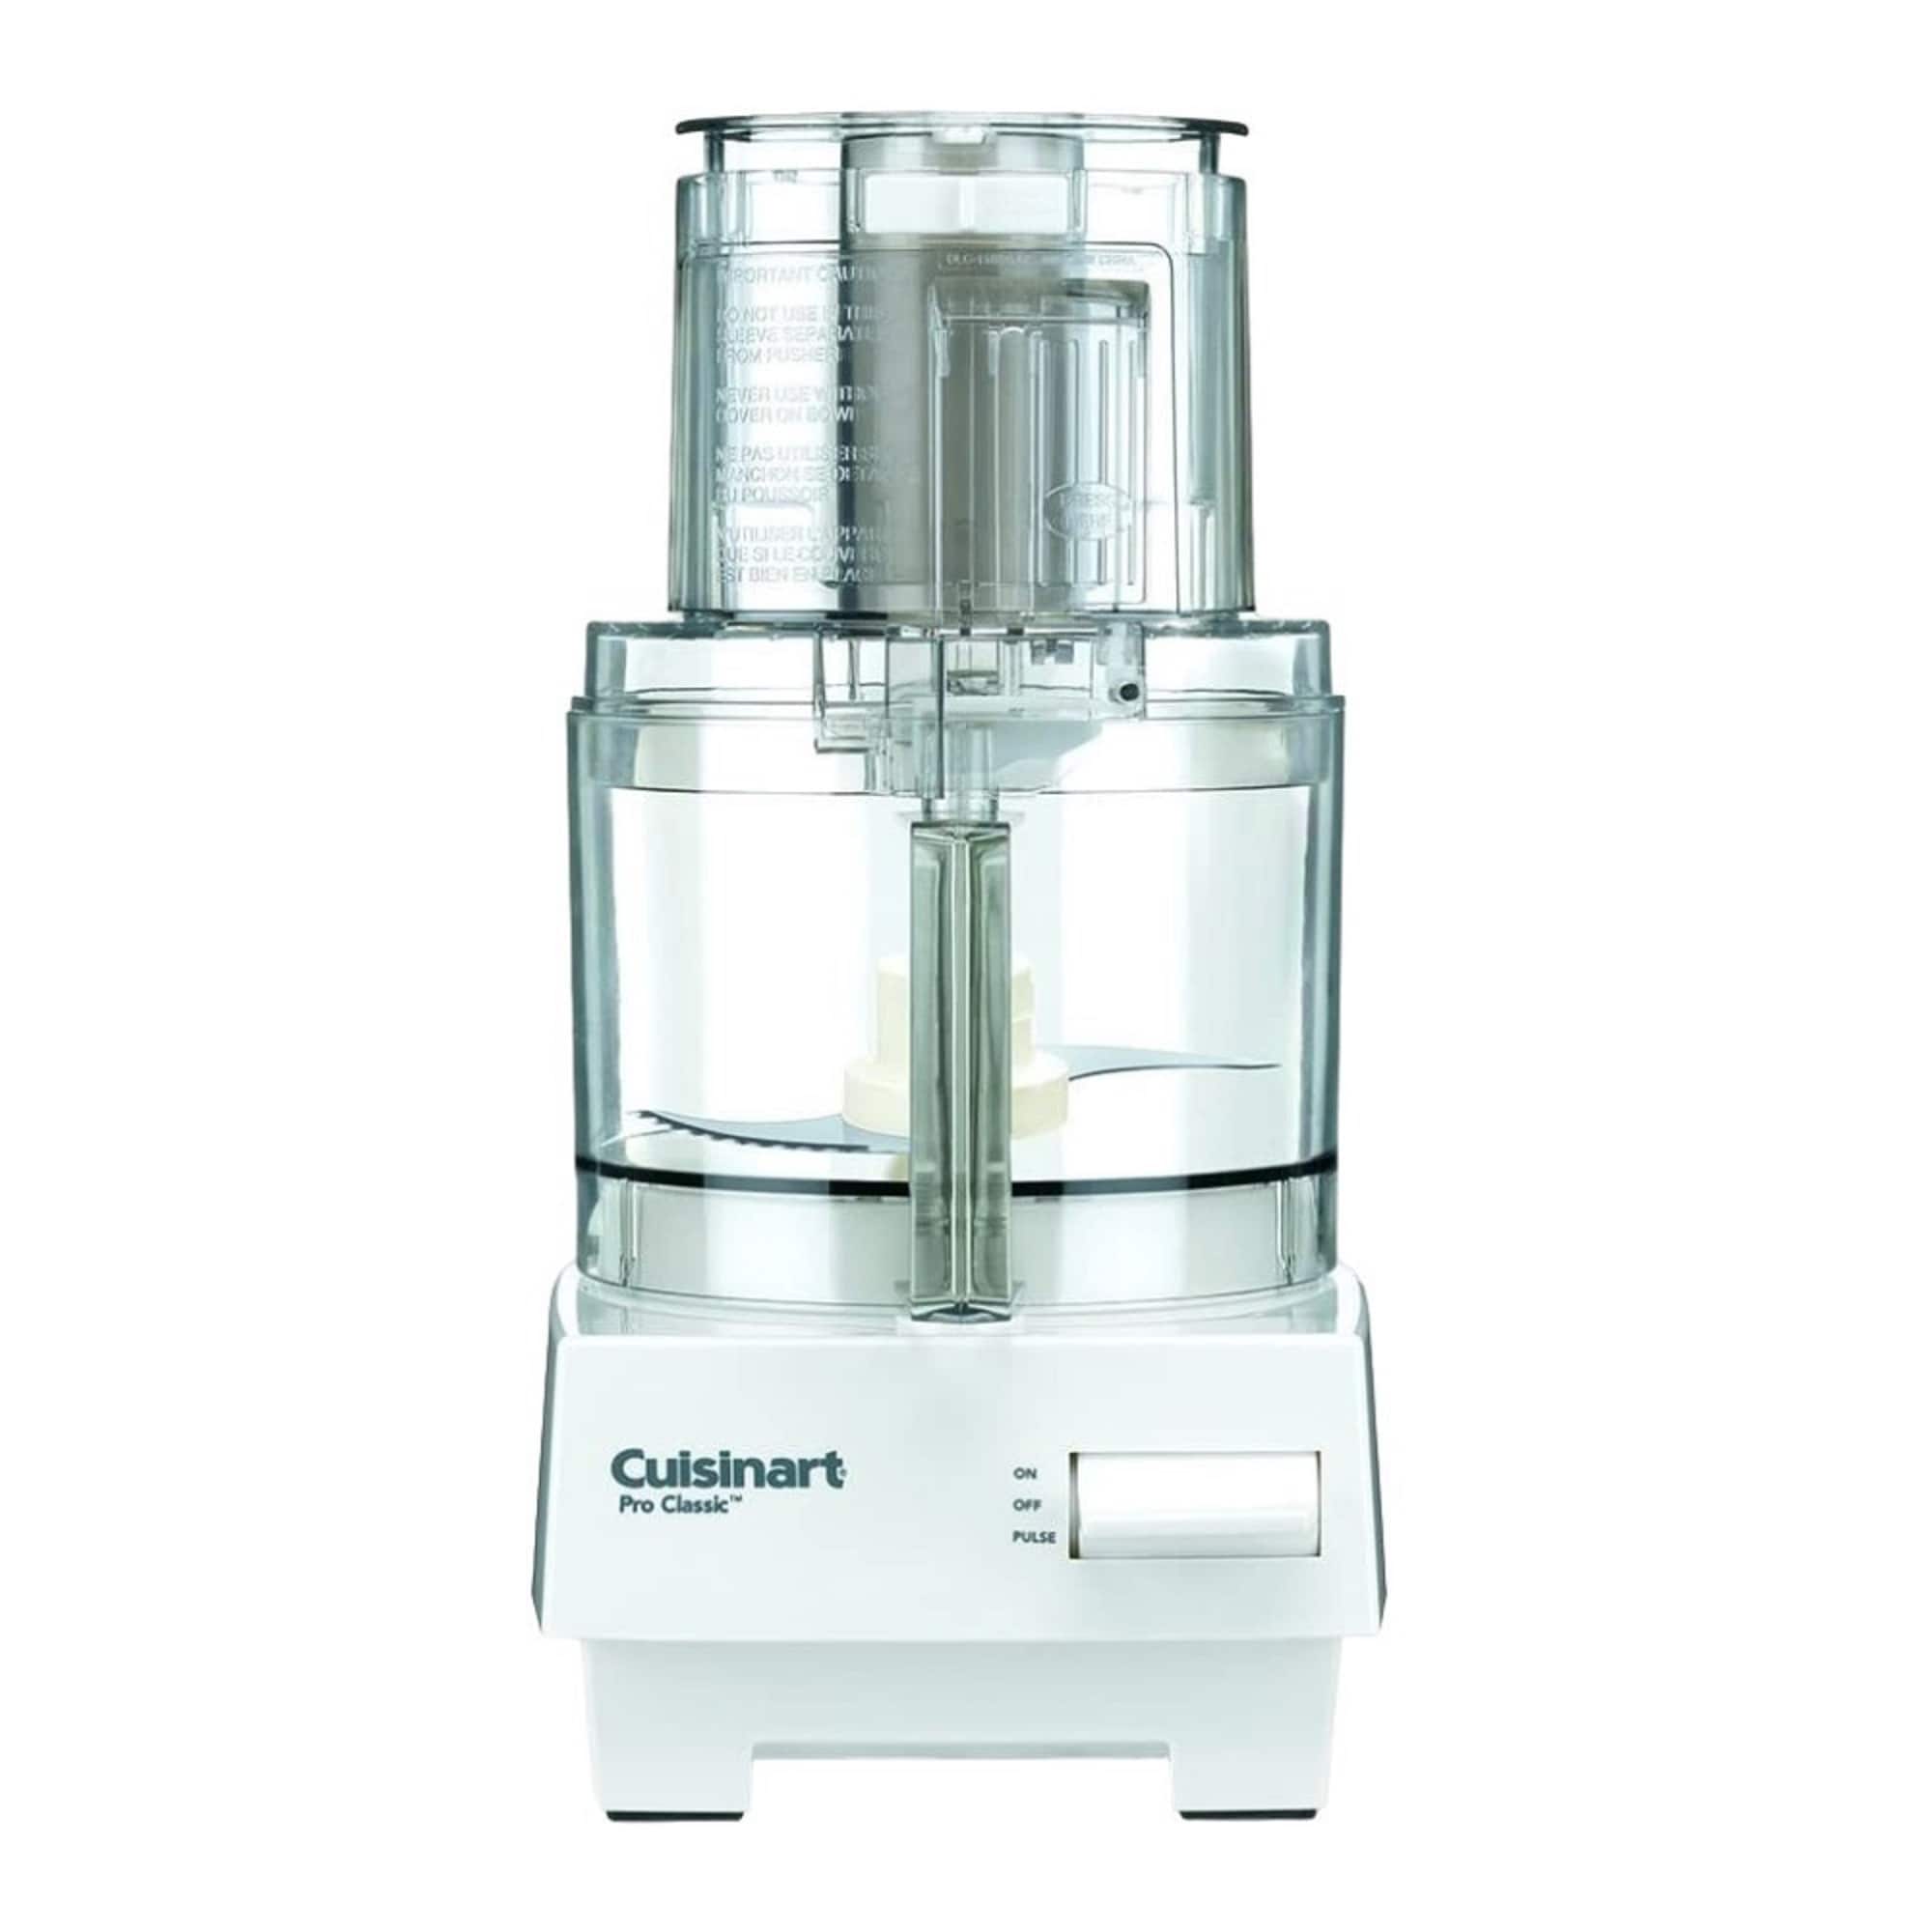 https://ak1.ostkcdn.com/images/products/is/images/direct/155595e08e7624054ffc1486c4d9143526d433fe/Cuisinart-Pro-Classic-7-Cup-Food-Processor-%28White%29.jpg